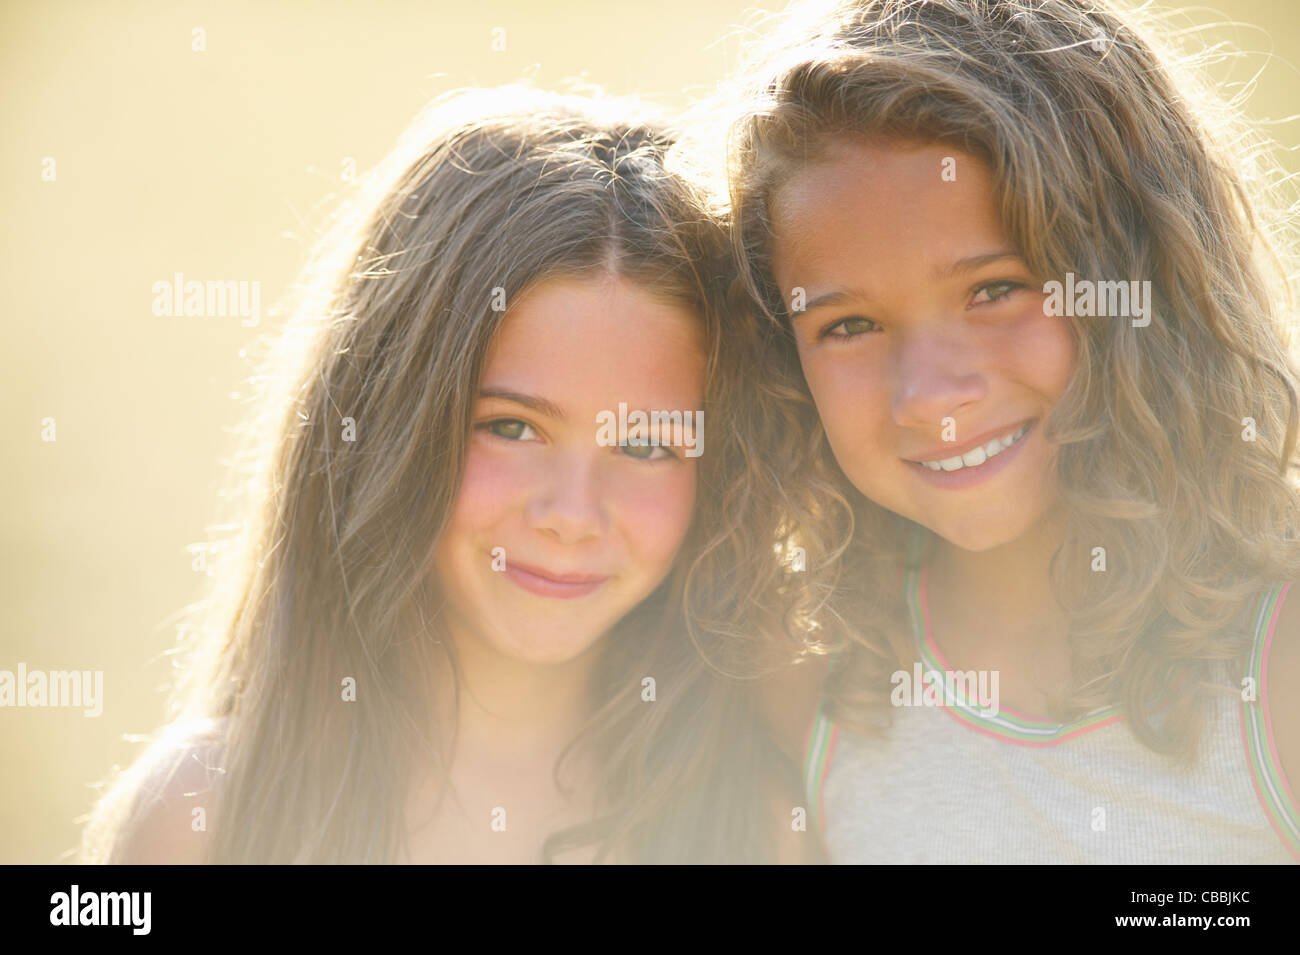 Smiling sisters hugging outdoors Stock Photo